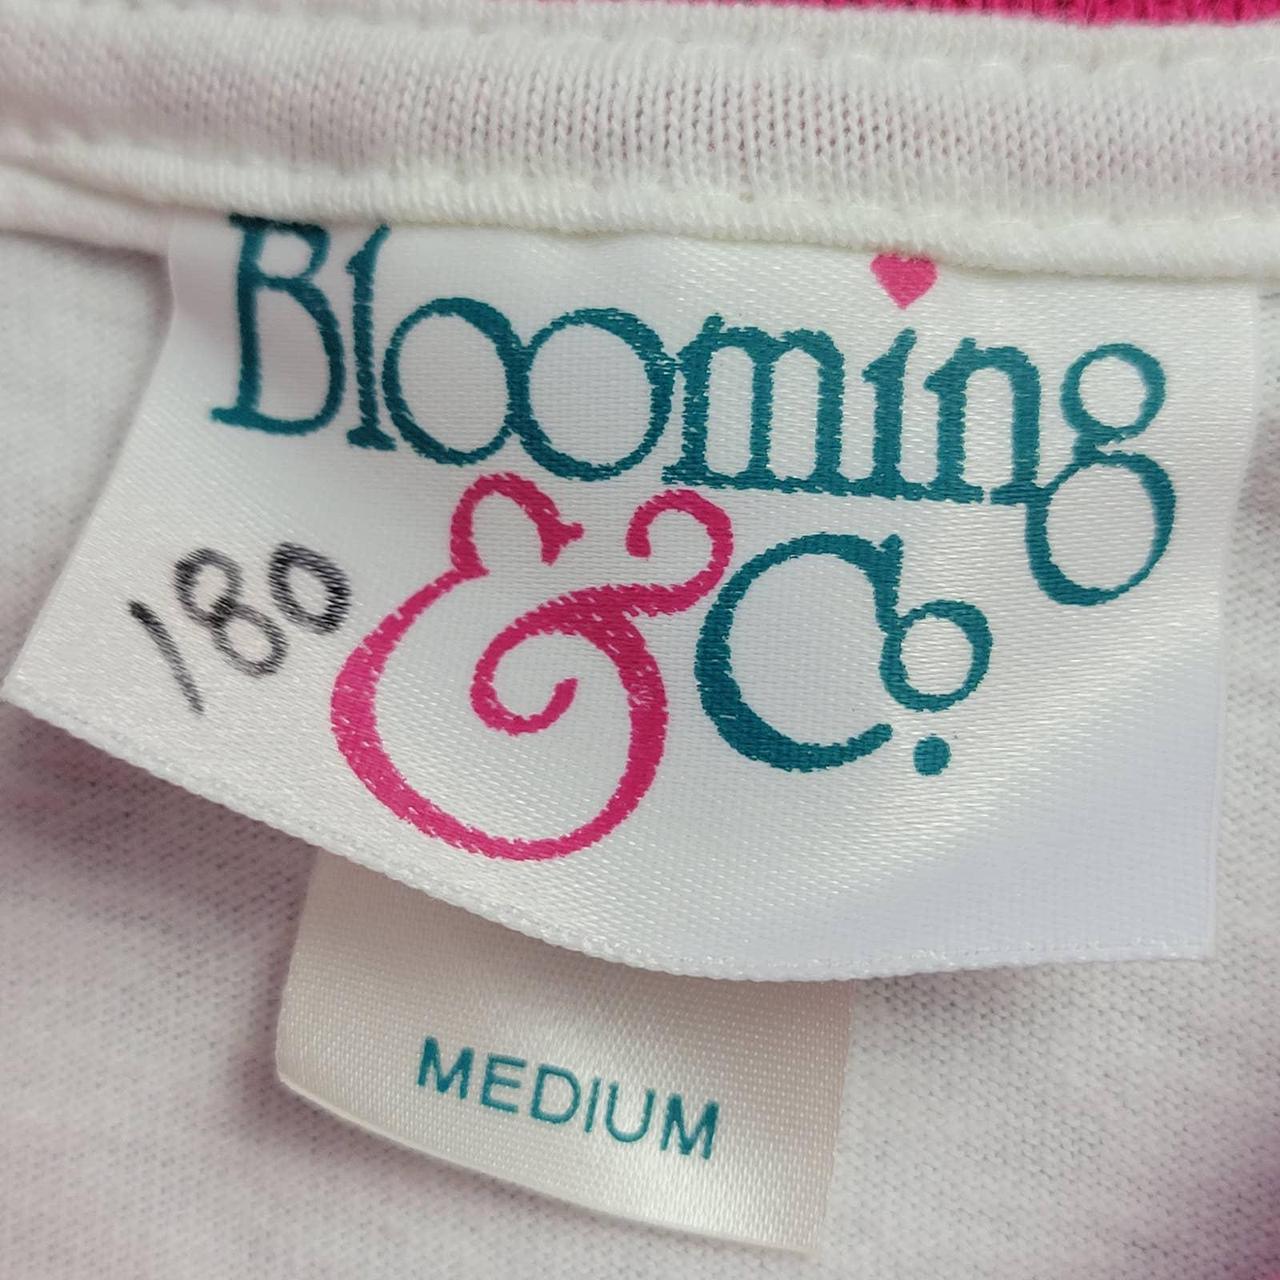 Blooming & Co. Women's White and Pink Blouse (3)